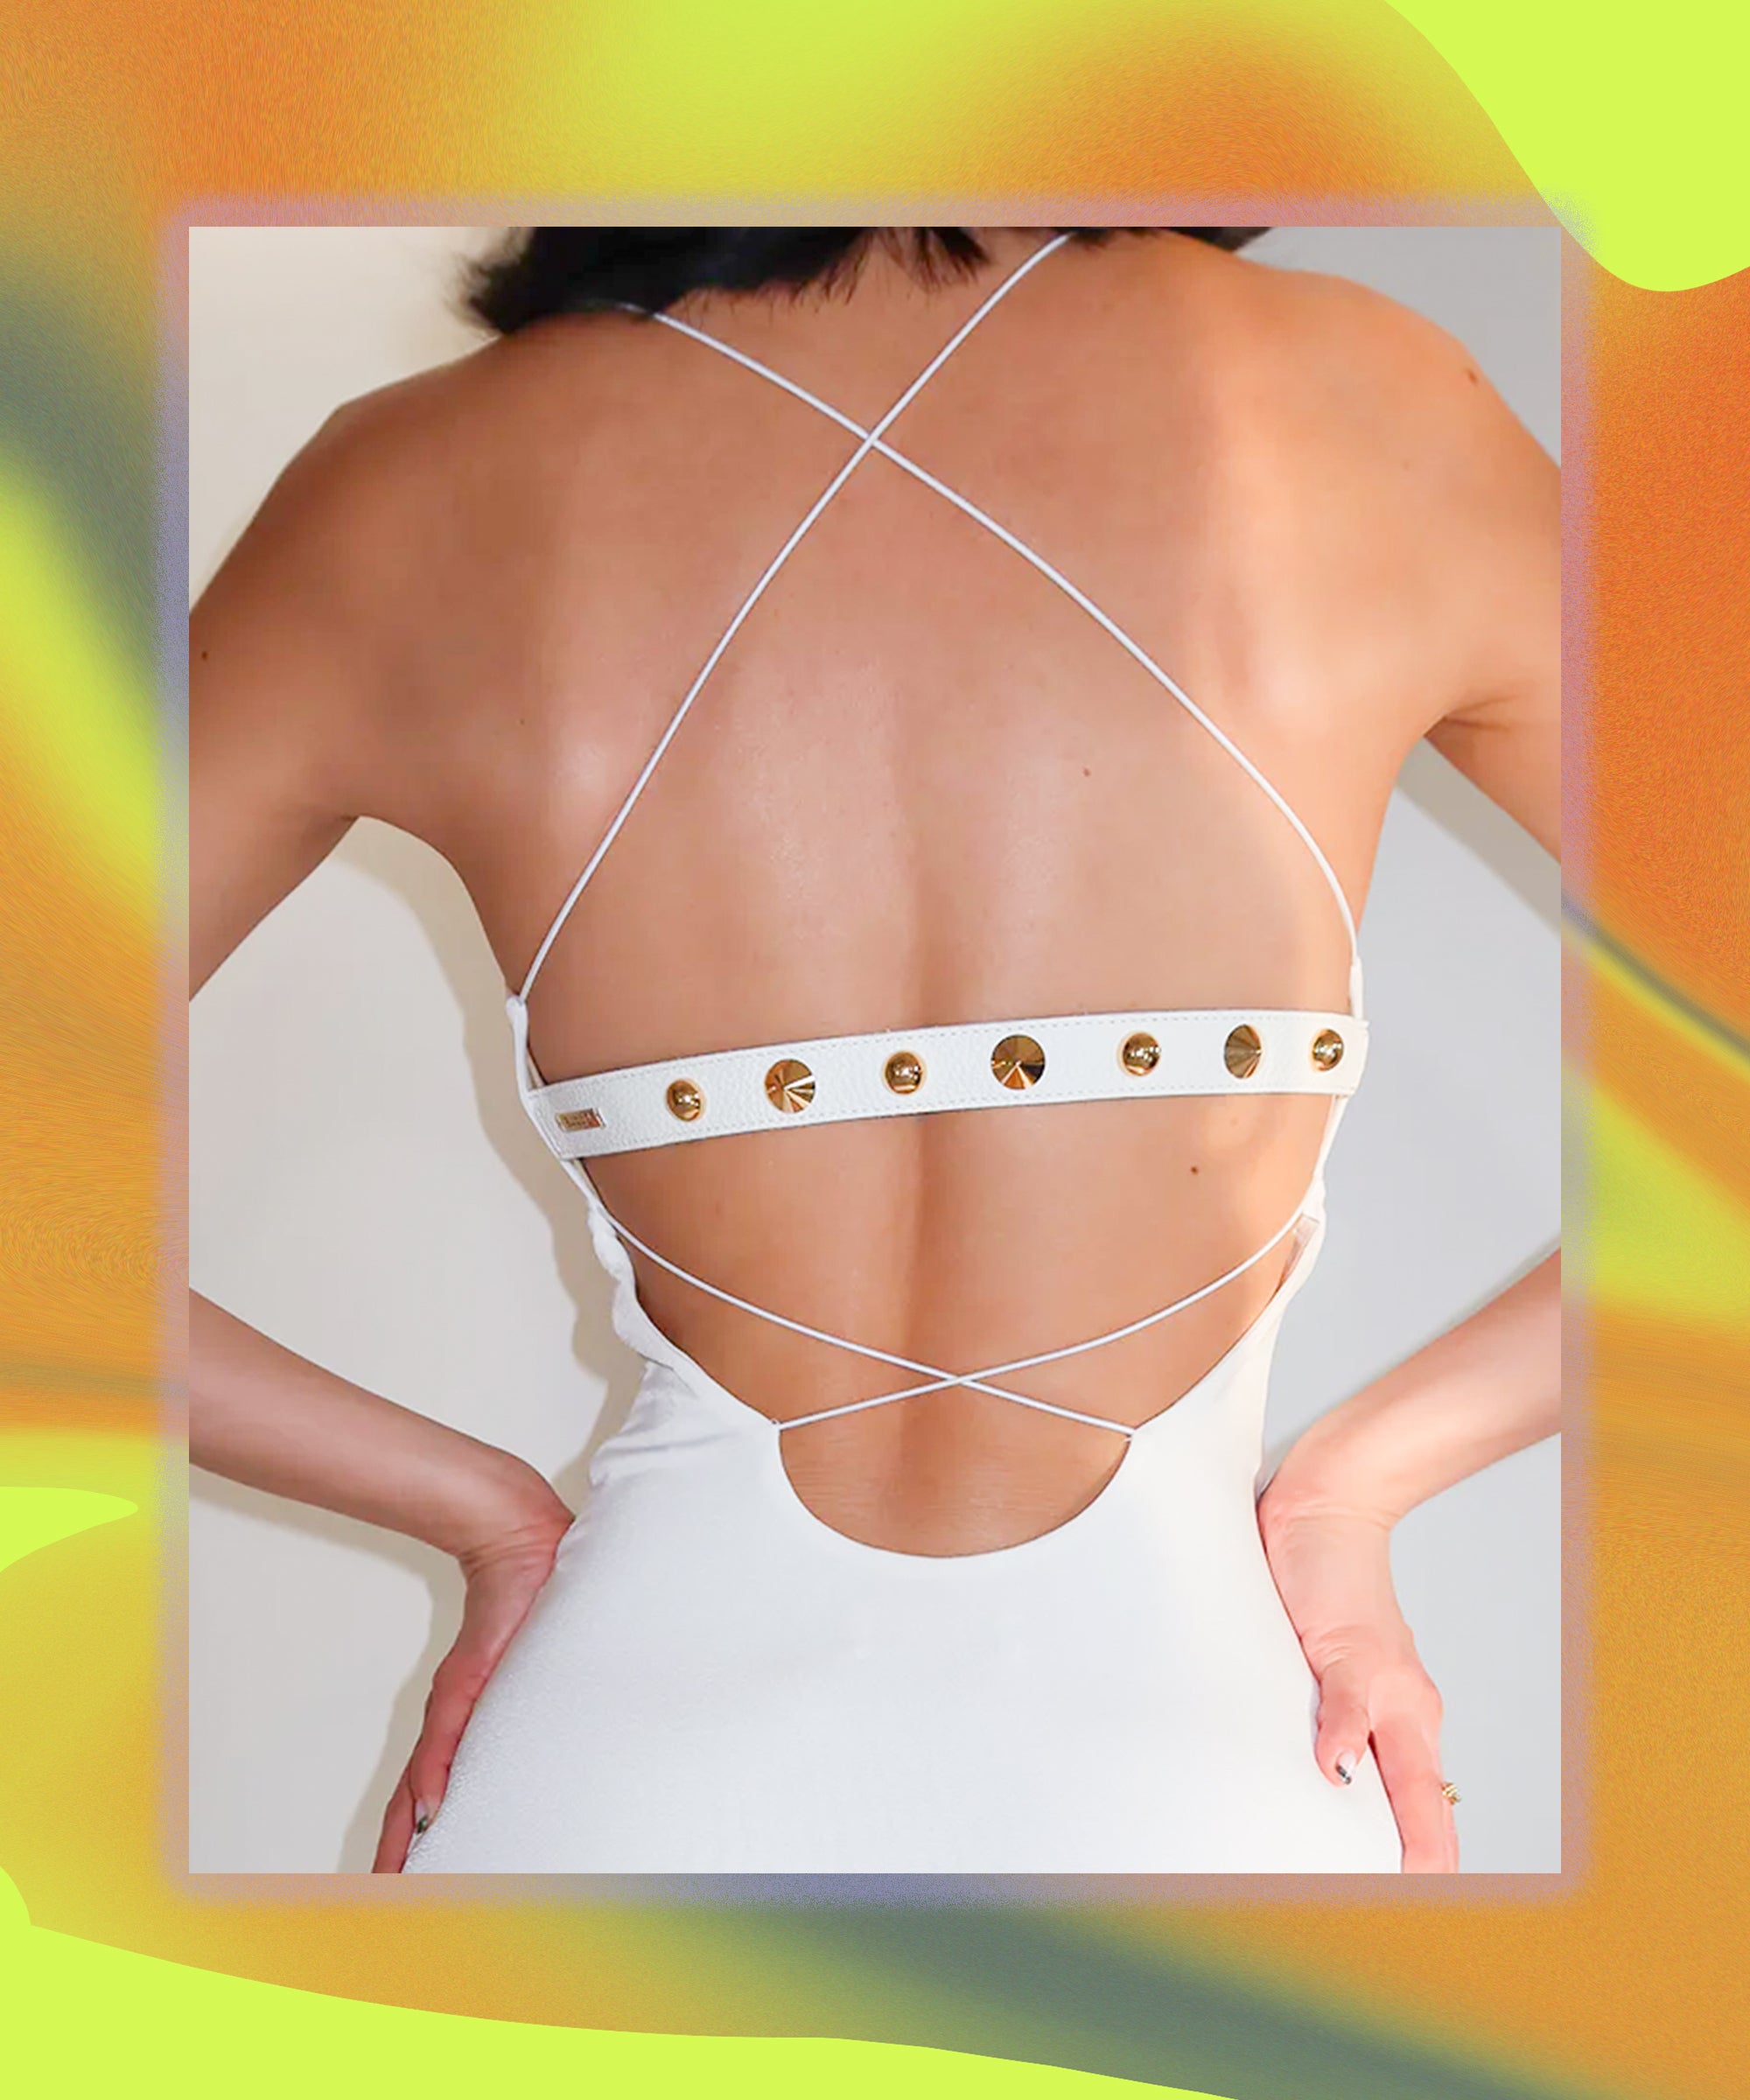 How To Make a DIY Backless Bra For Your Favorite Backless Dress